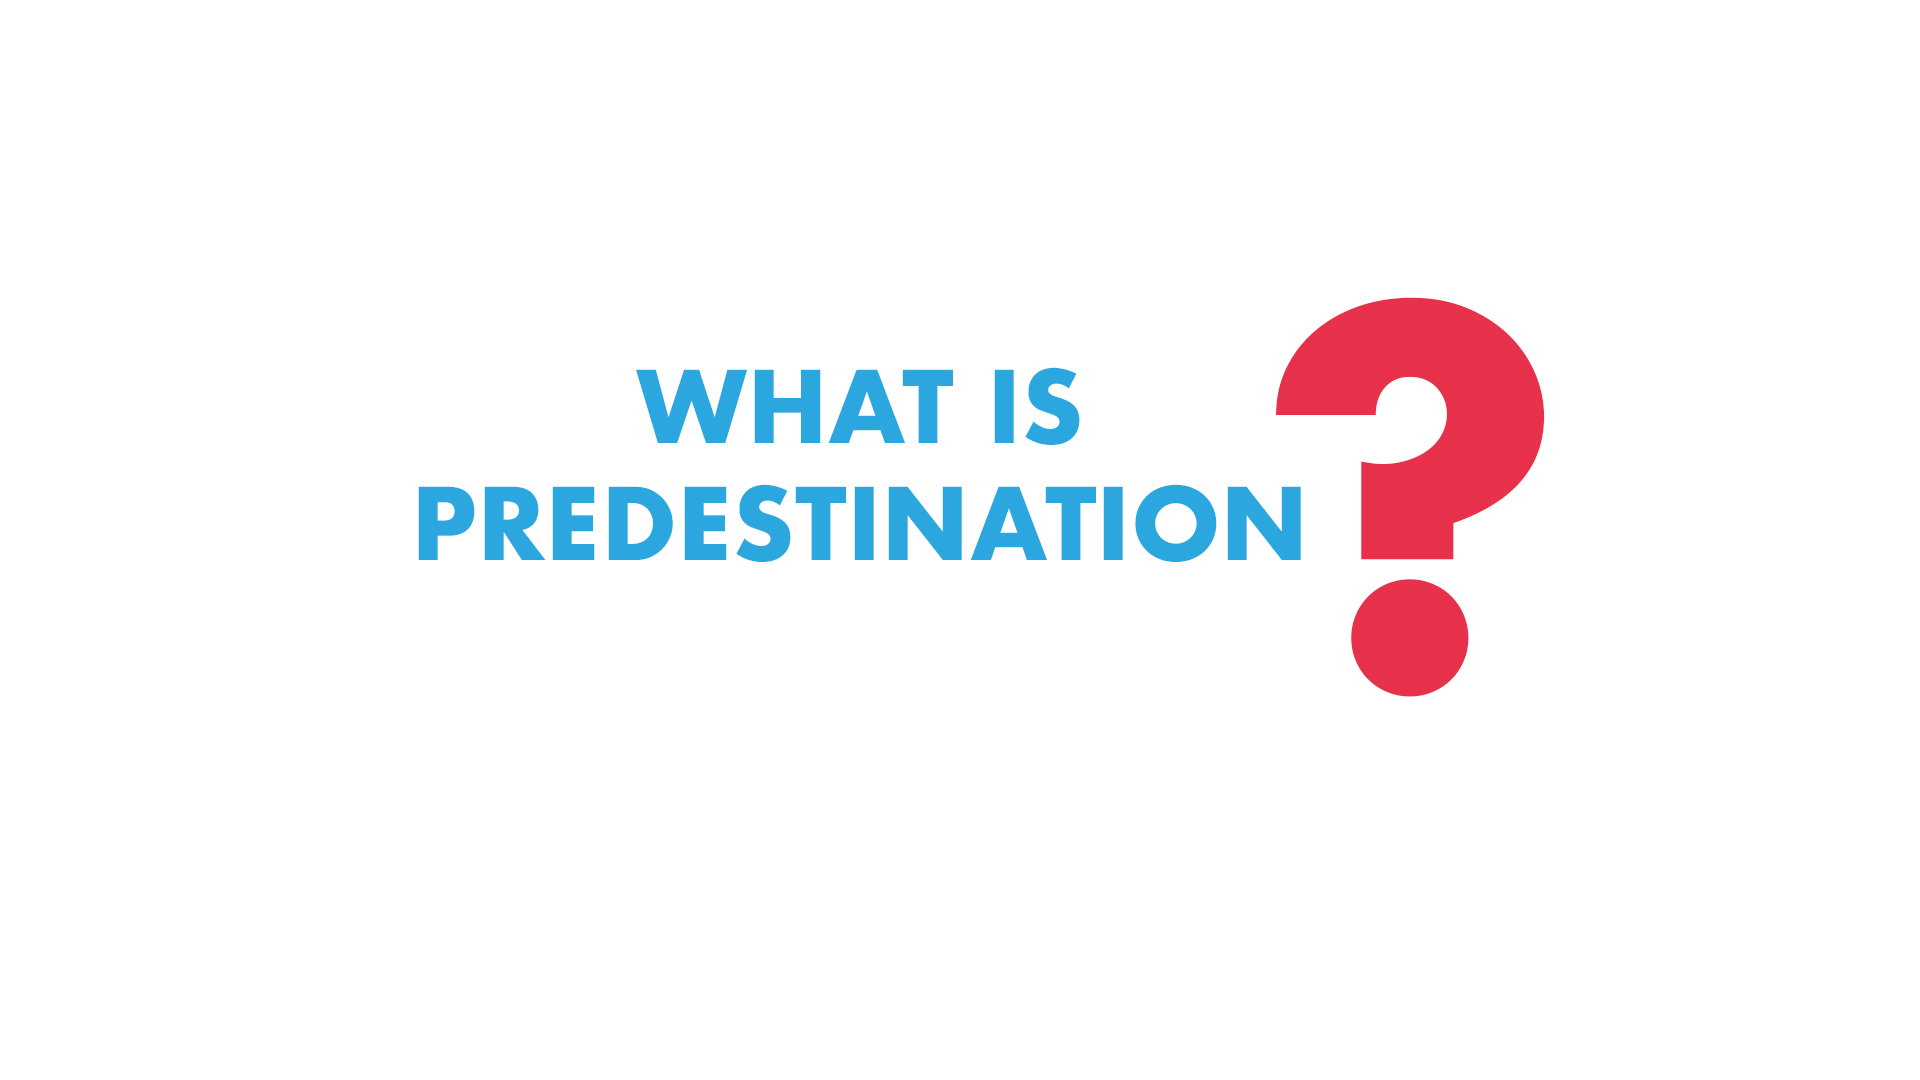 Could you give a Discussion on Predestination?